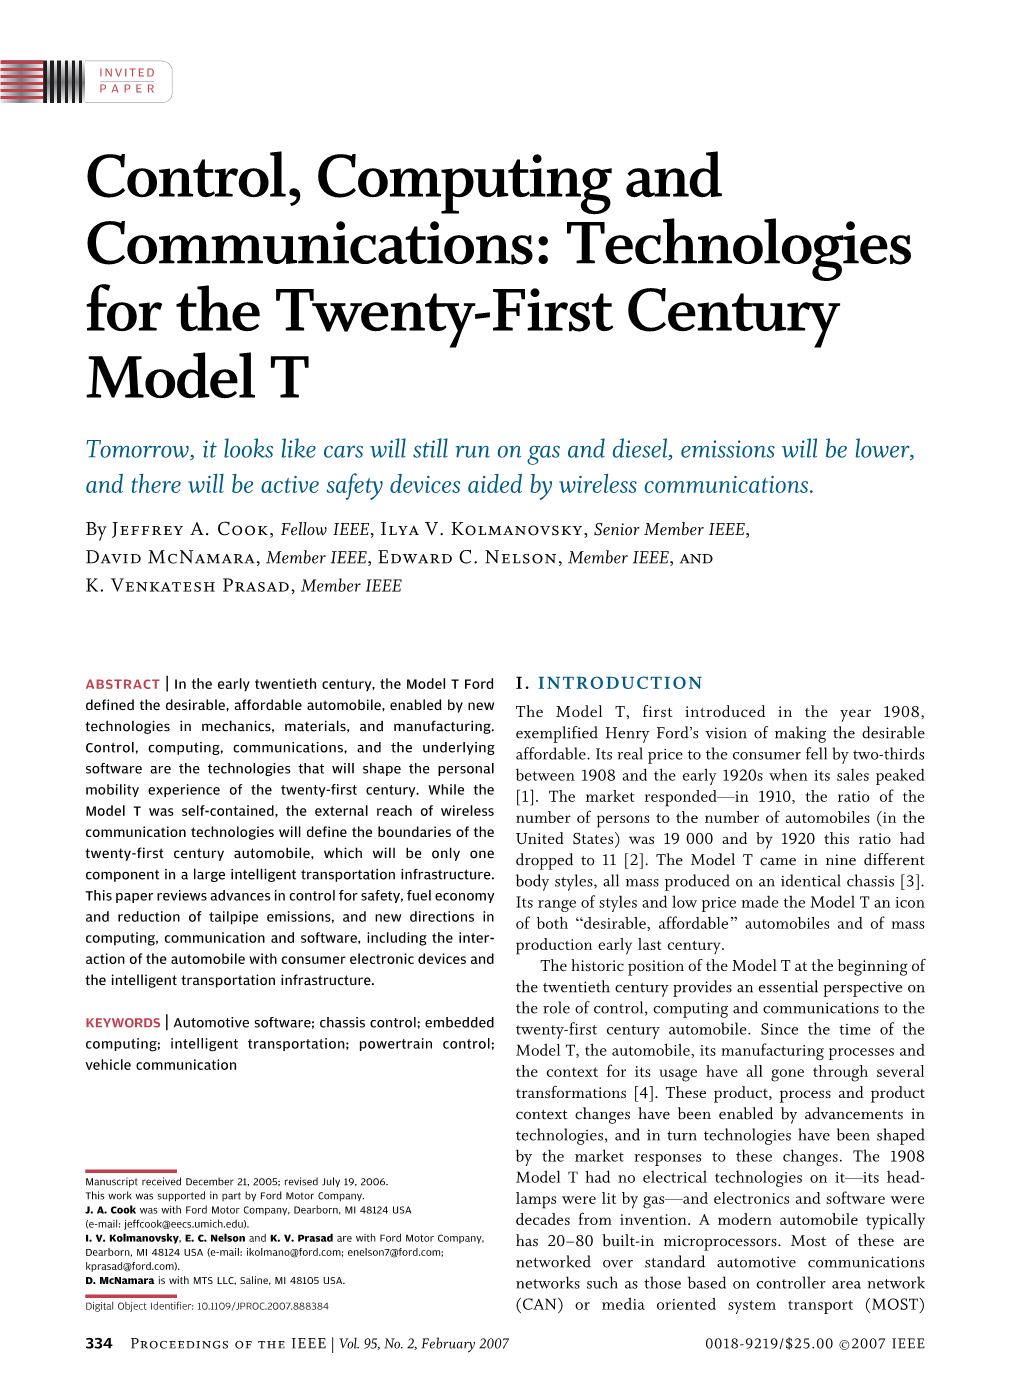 Technologies for the Twenty First Century Model T By